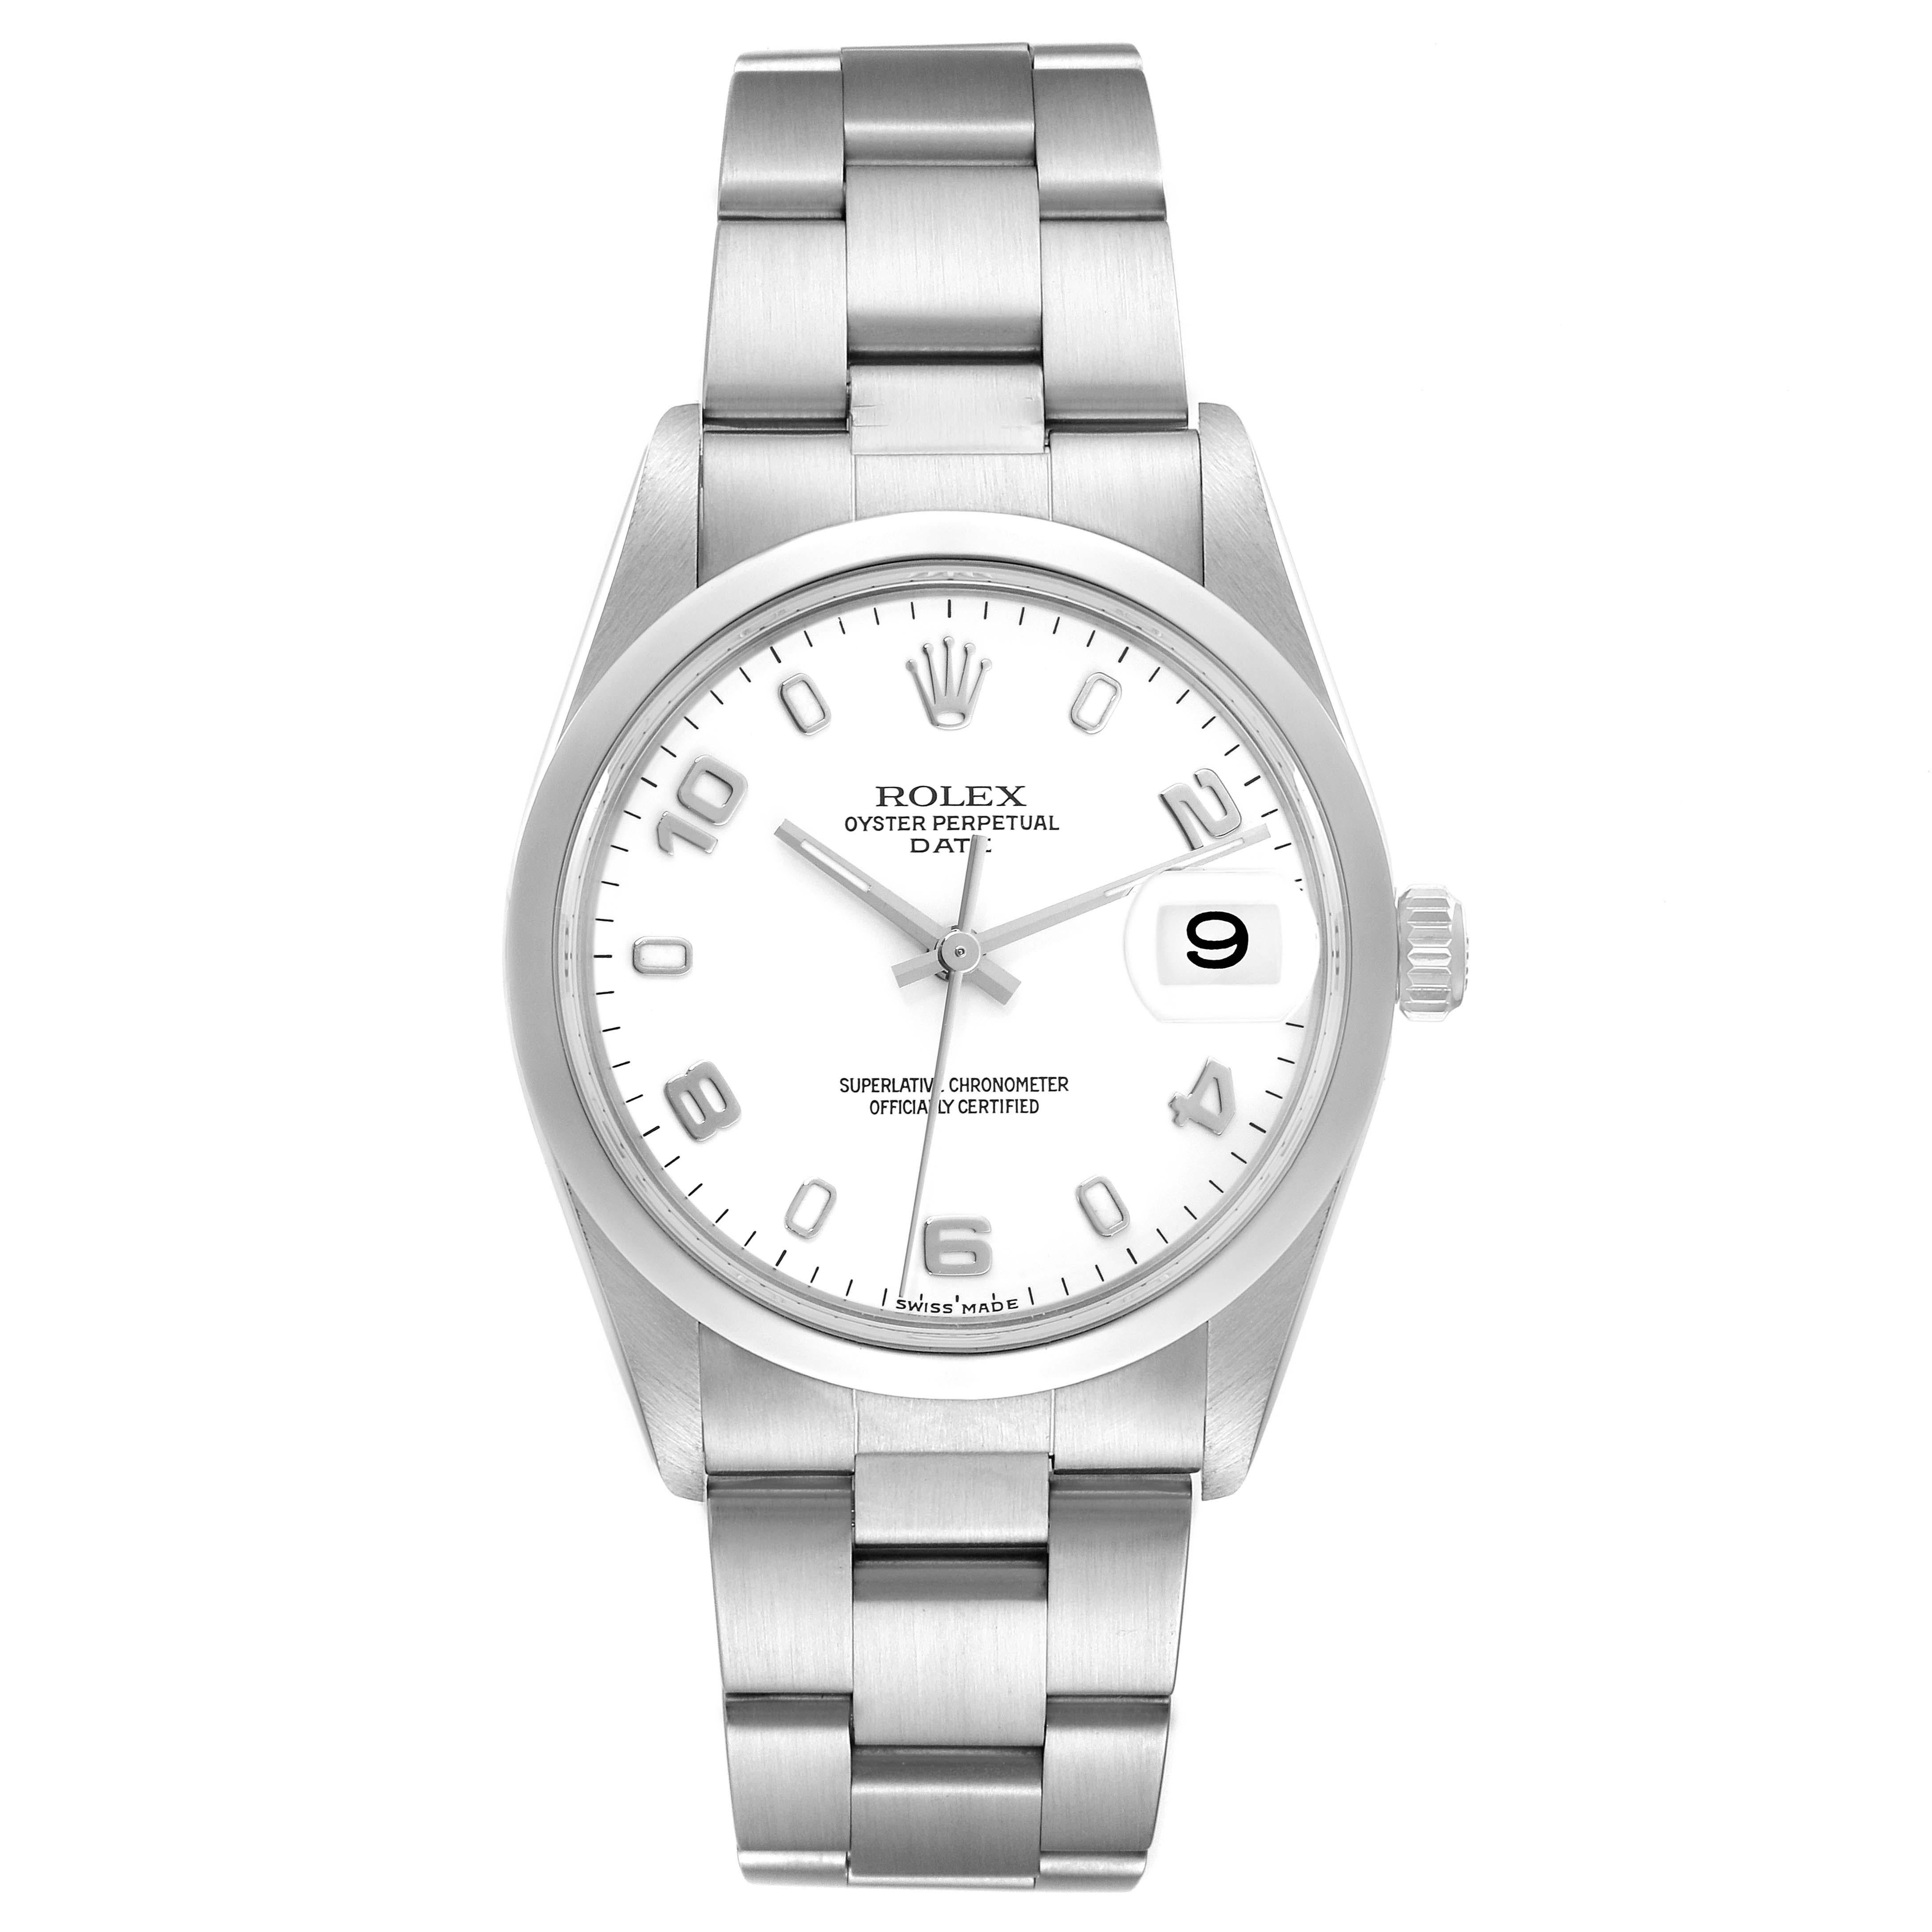 Rolex Date White Dial Oyster Bracelet Steel Mens Watch 15200. Officially certified chronometer self-winding movement. Stainless steel oyster case 34.0 mm in diameter. Rolex logo on the crown. Stainless steel smooth bezel. Scratch resistant sapphire